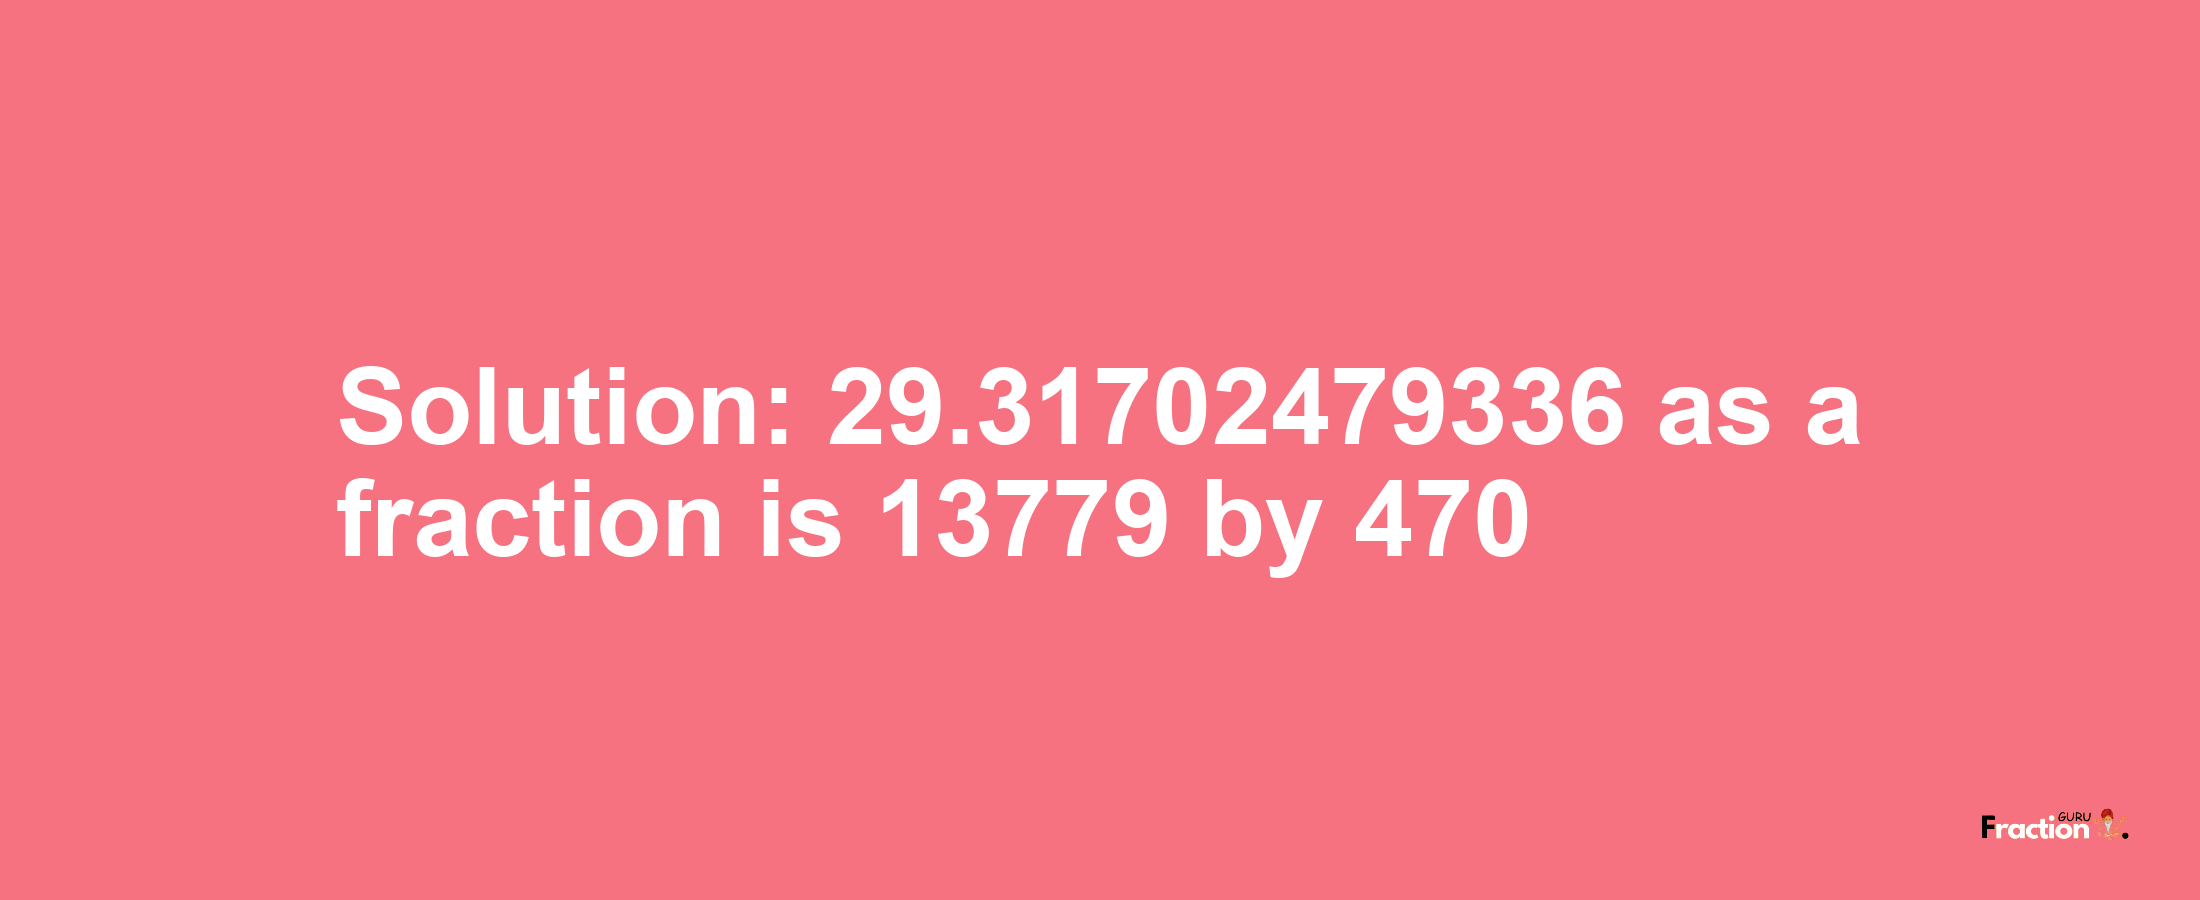 Solution:29.31702479336 as a fraction is 13779/470